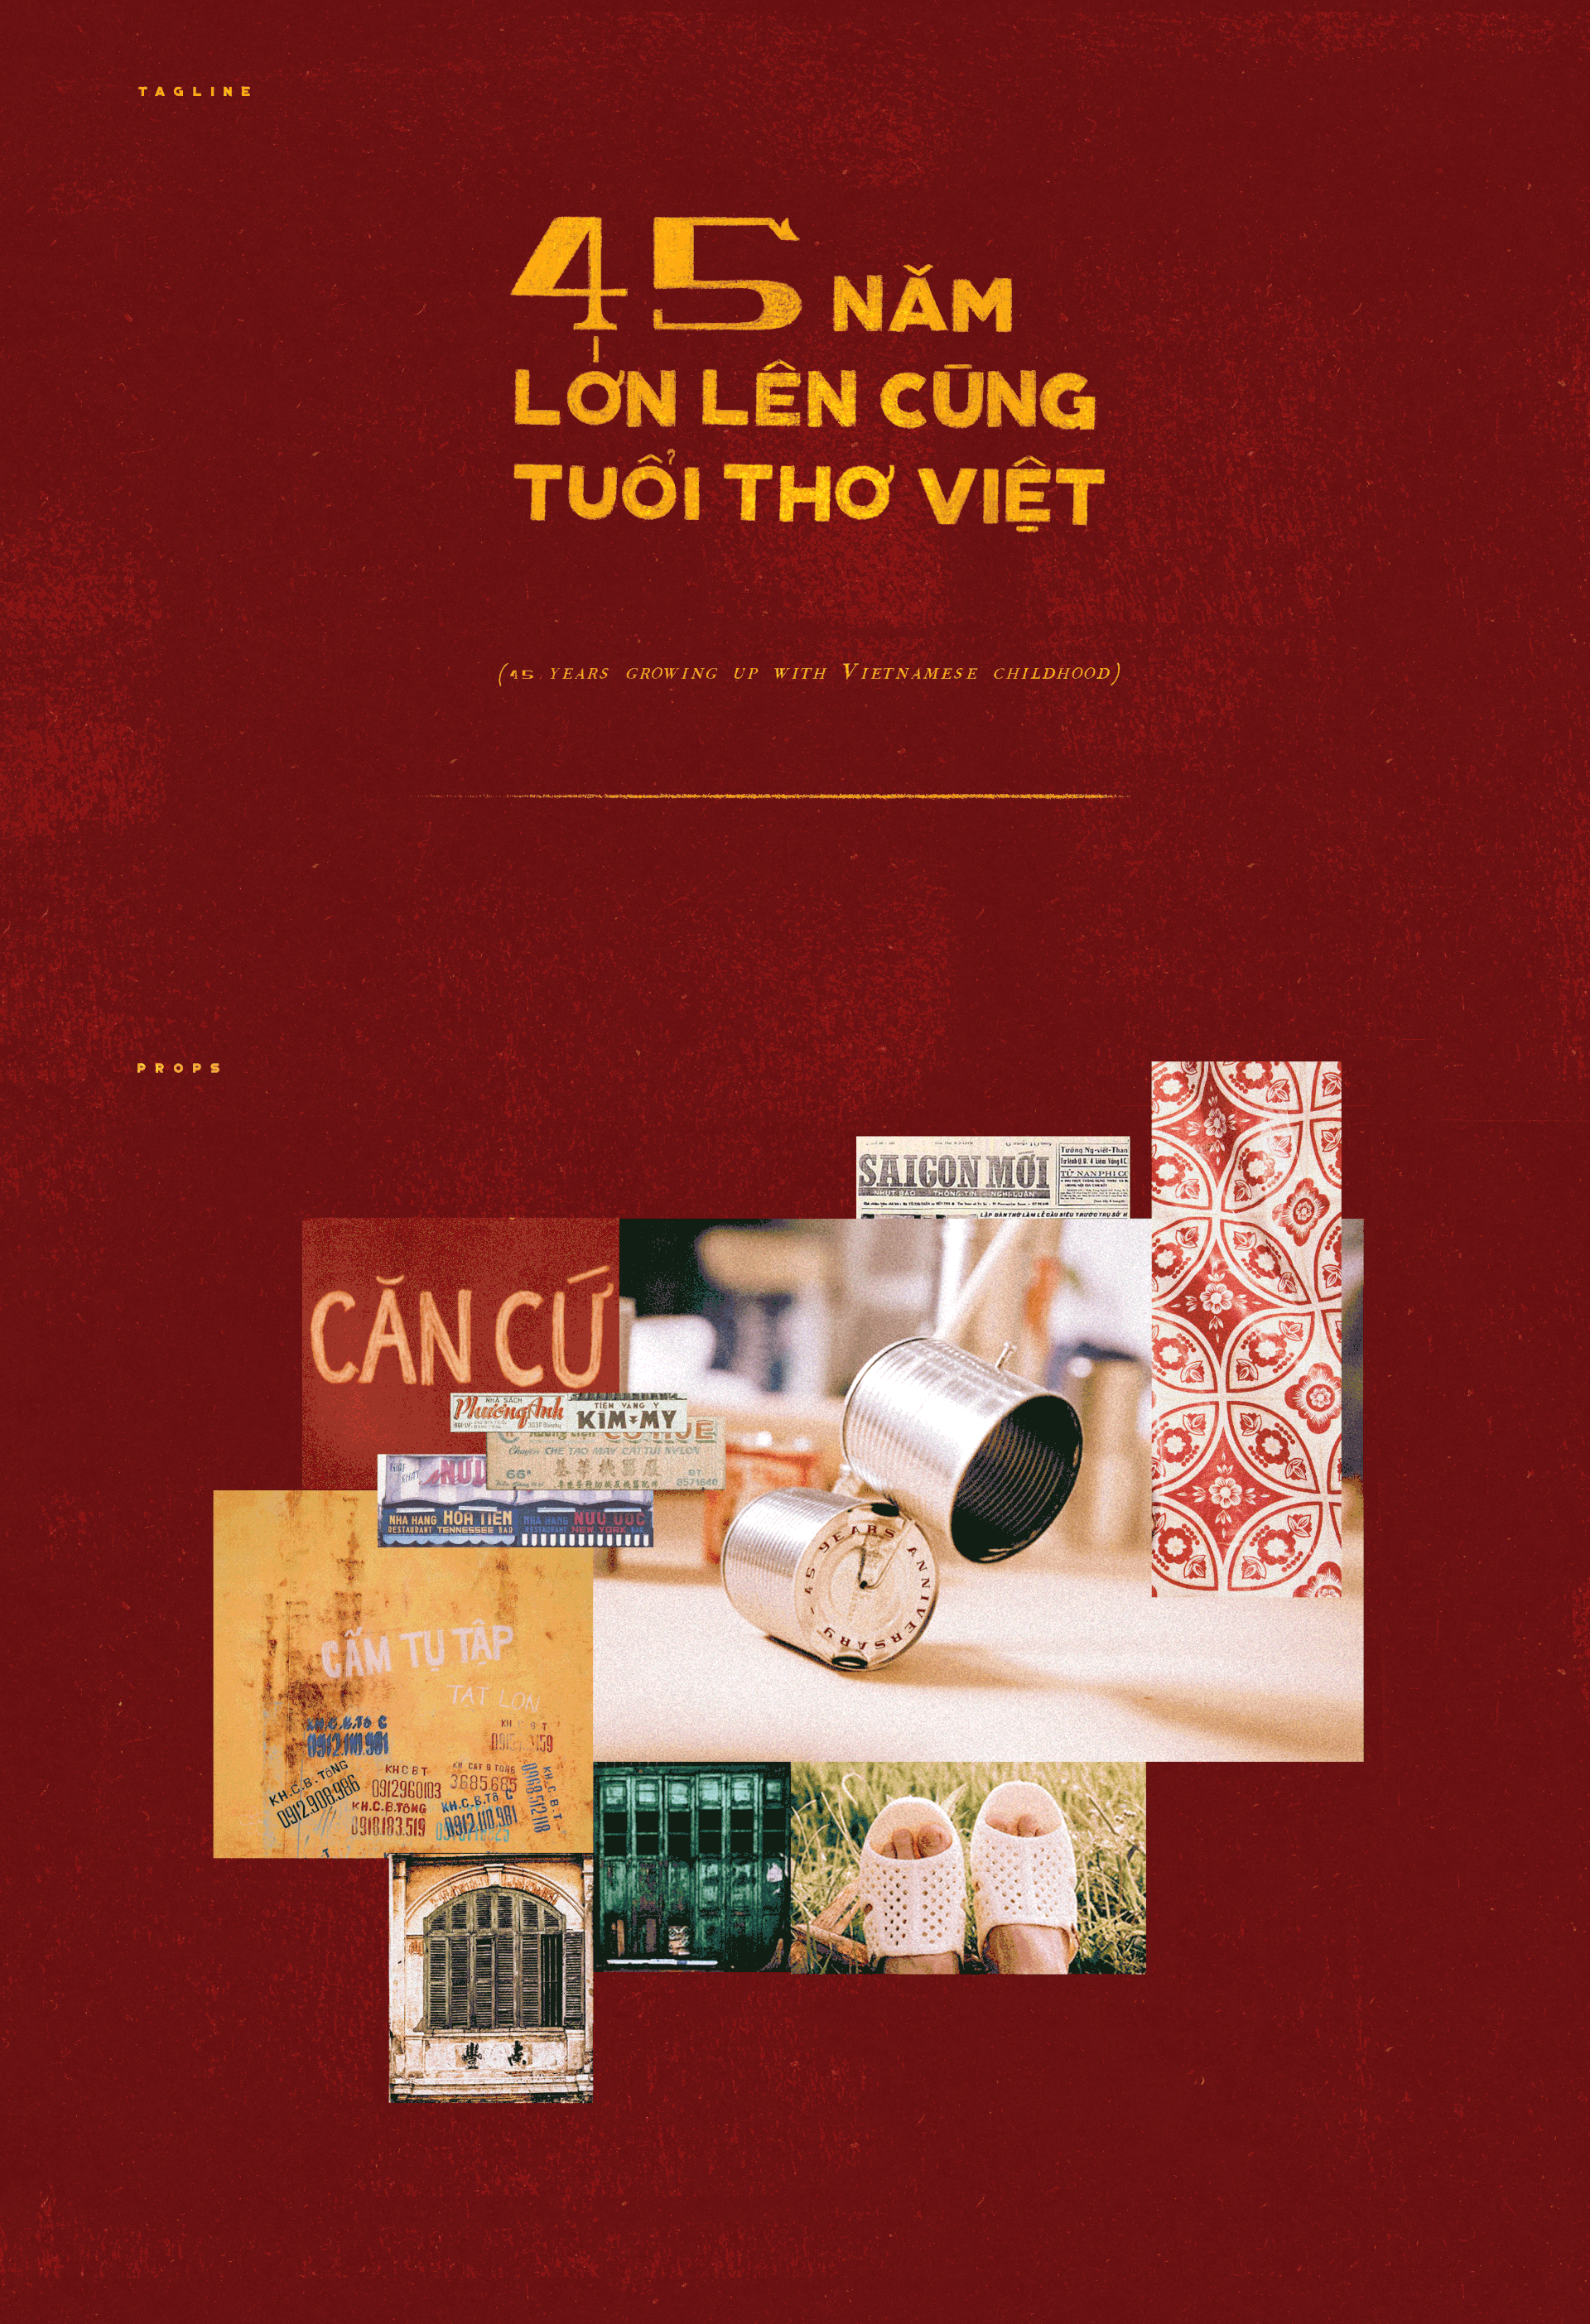 [Illustrations] An Ode to Sữa Ông Thọ and the Games of Our Saigon Childhood - Saigoneer